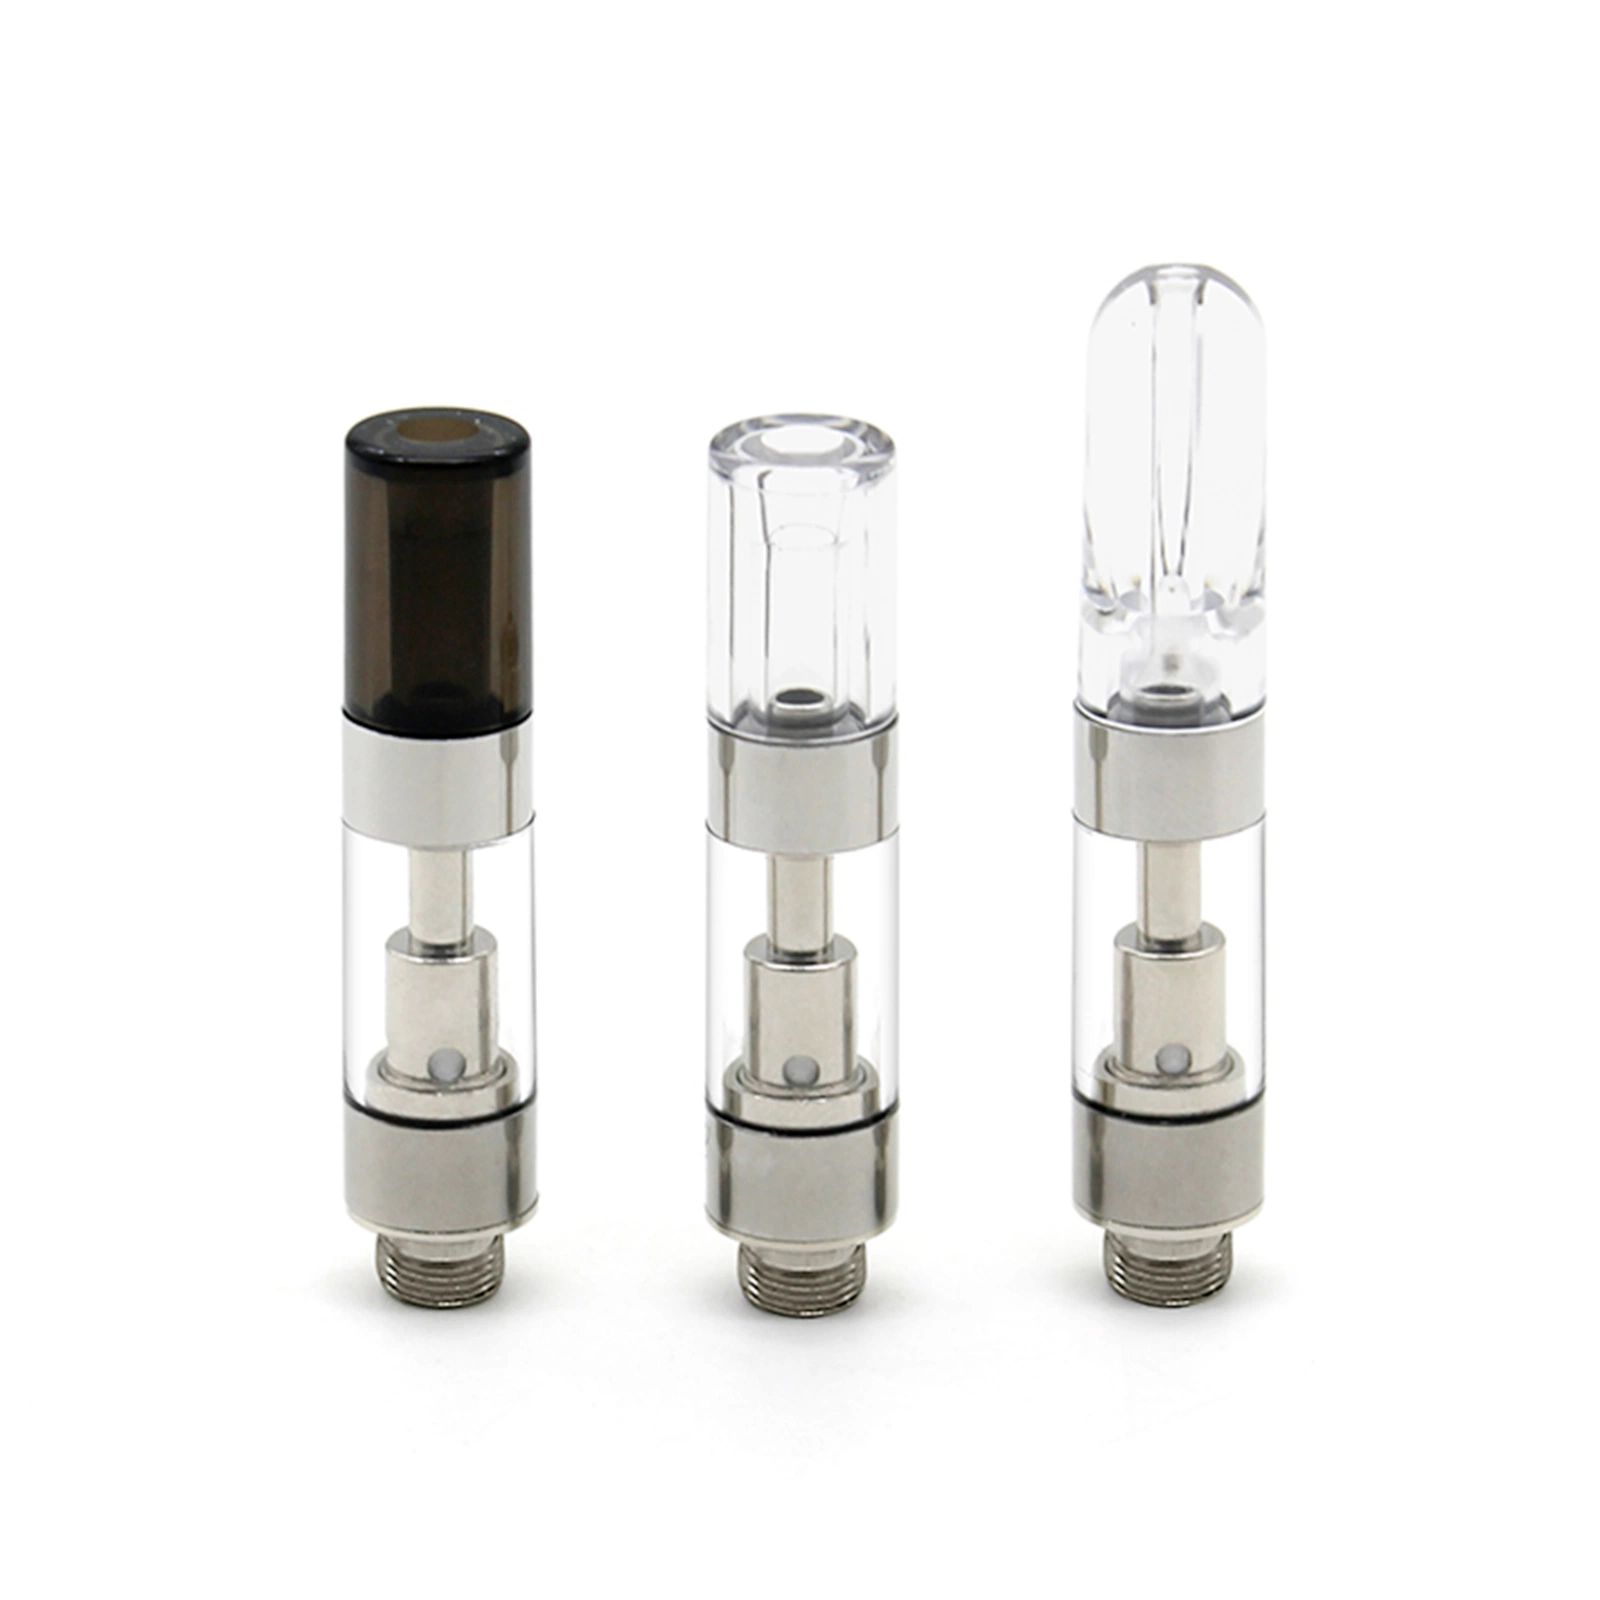 Hot Sale and New 510 Thread Thick Oil Lead Free Ceramic Coil Cartridge Empty Vape Pen Cartridge Suitable for 510 Battery